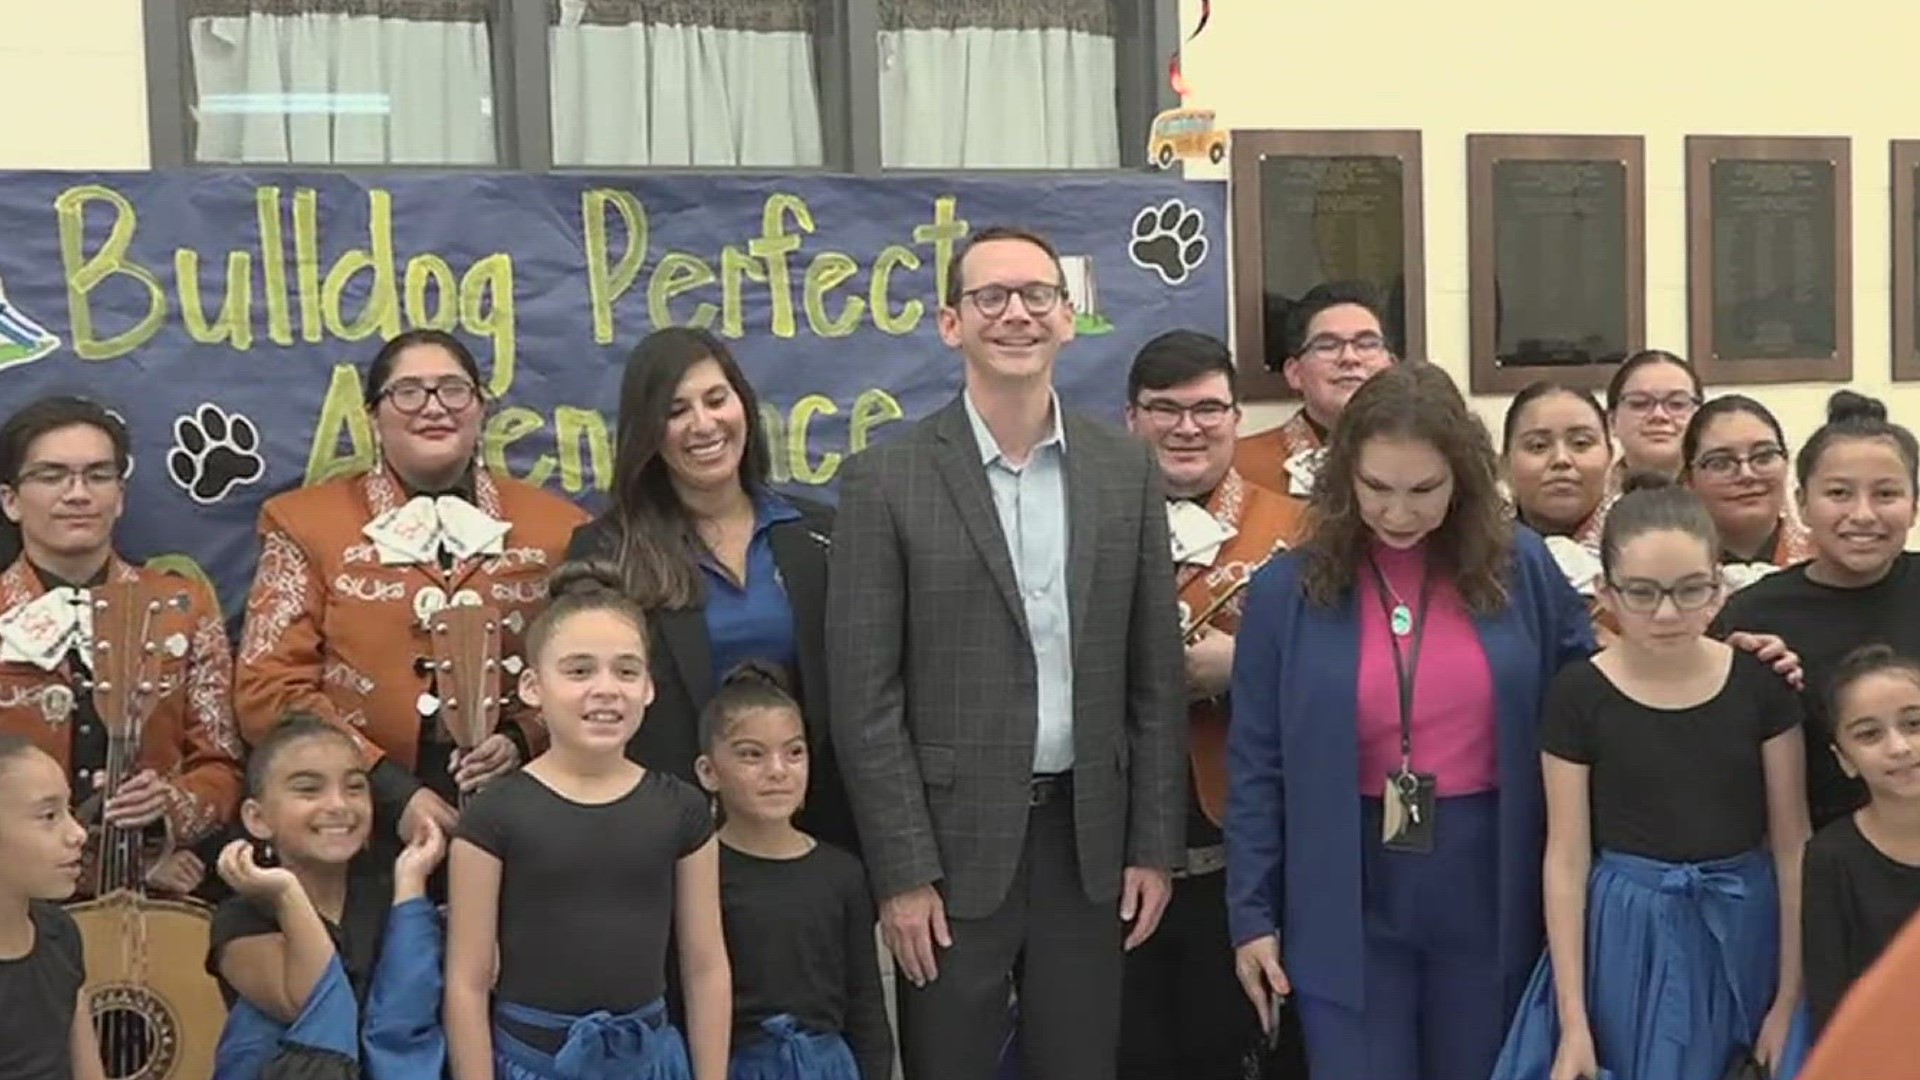 He toured Alice ISD's Schallert Elementary and was received a warm welcome from the Alice High School Mariachi Coyote and Schallert's ACE Folklorico dancers.